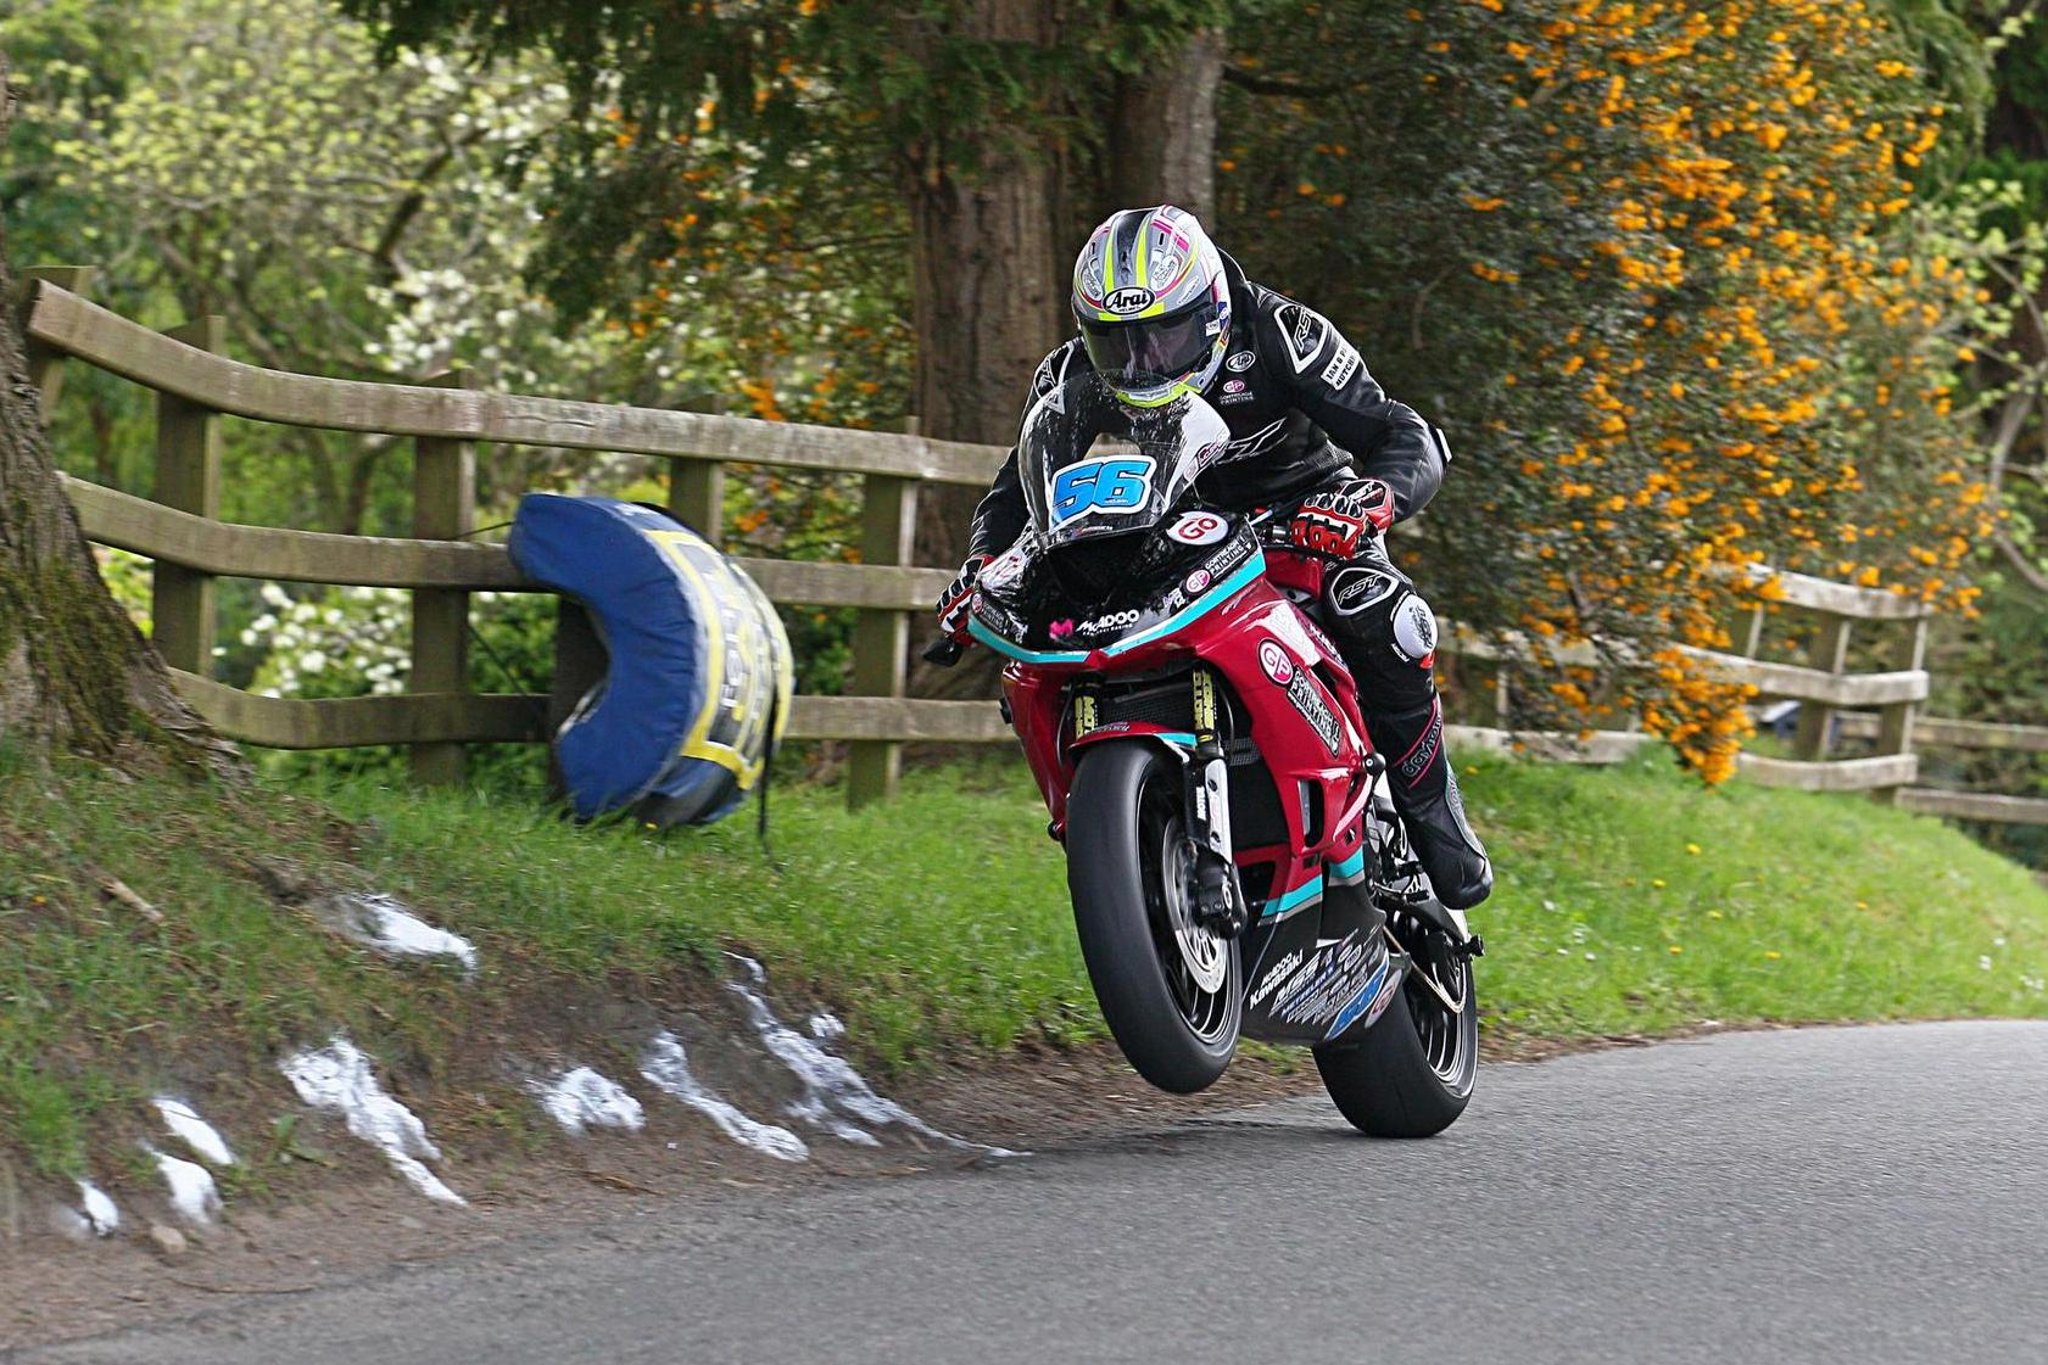 Adam McLean in pole position double at Cookstown 100 as Mike Browne tops Superbike times